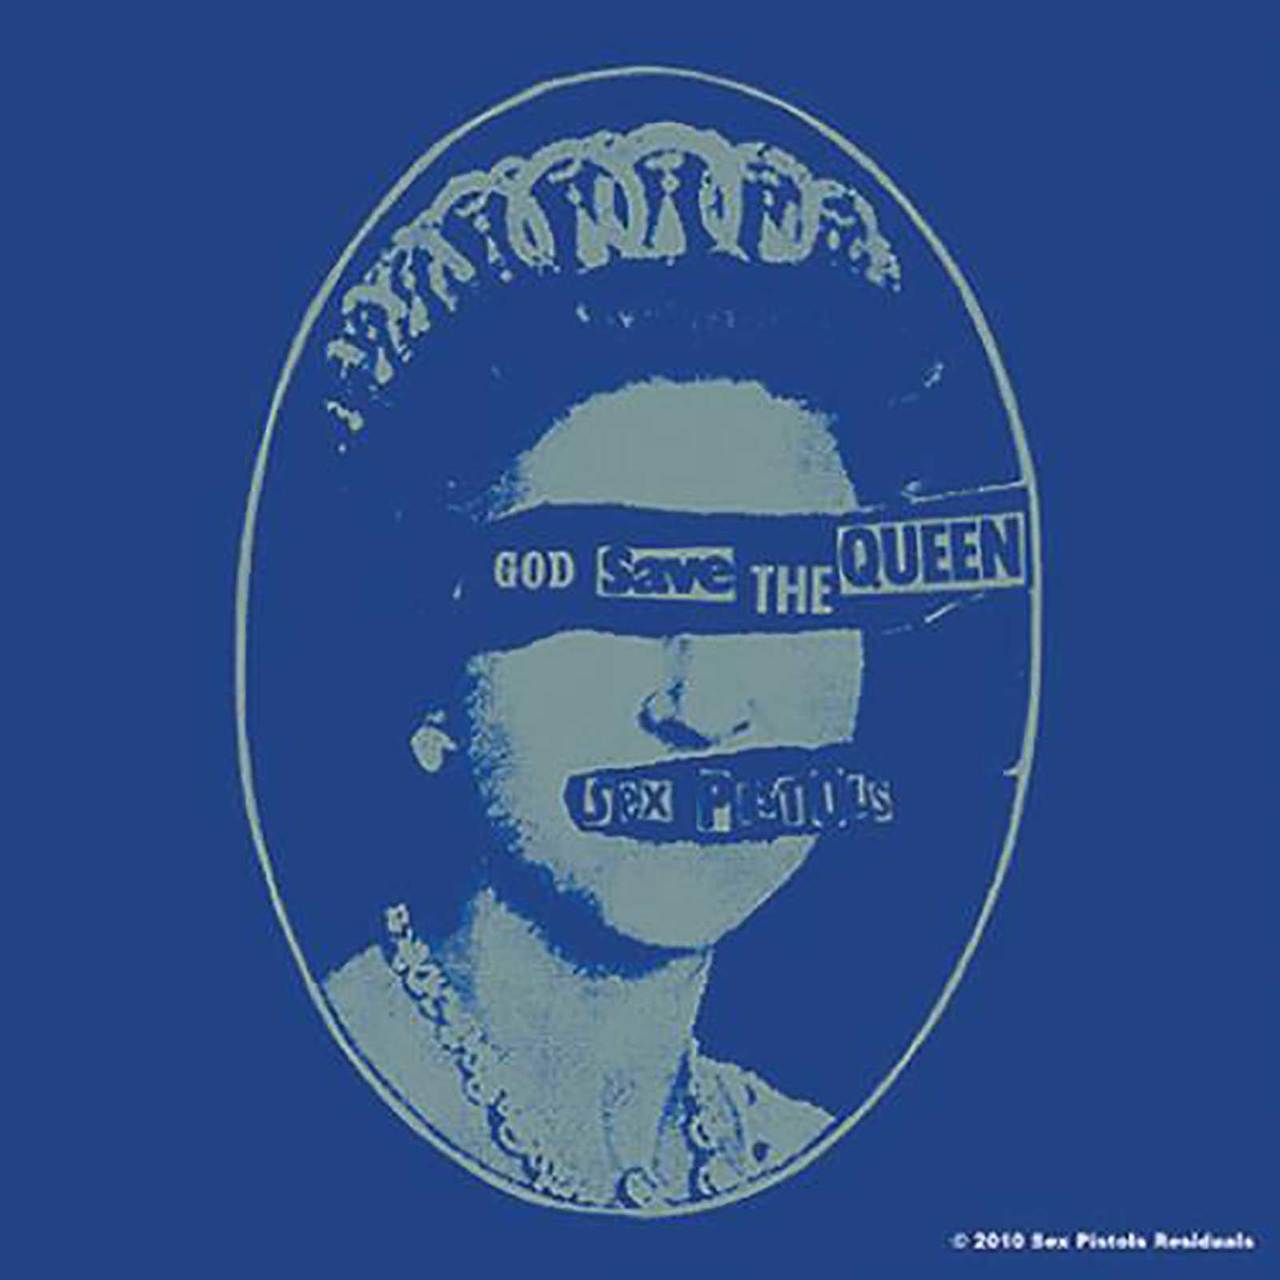 Blue Circle Band Logo - The Sex Pistols Coaster God Save The Queen Band Logo Blue